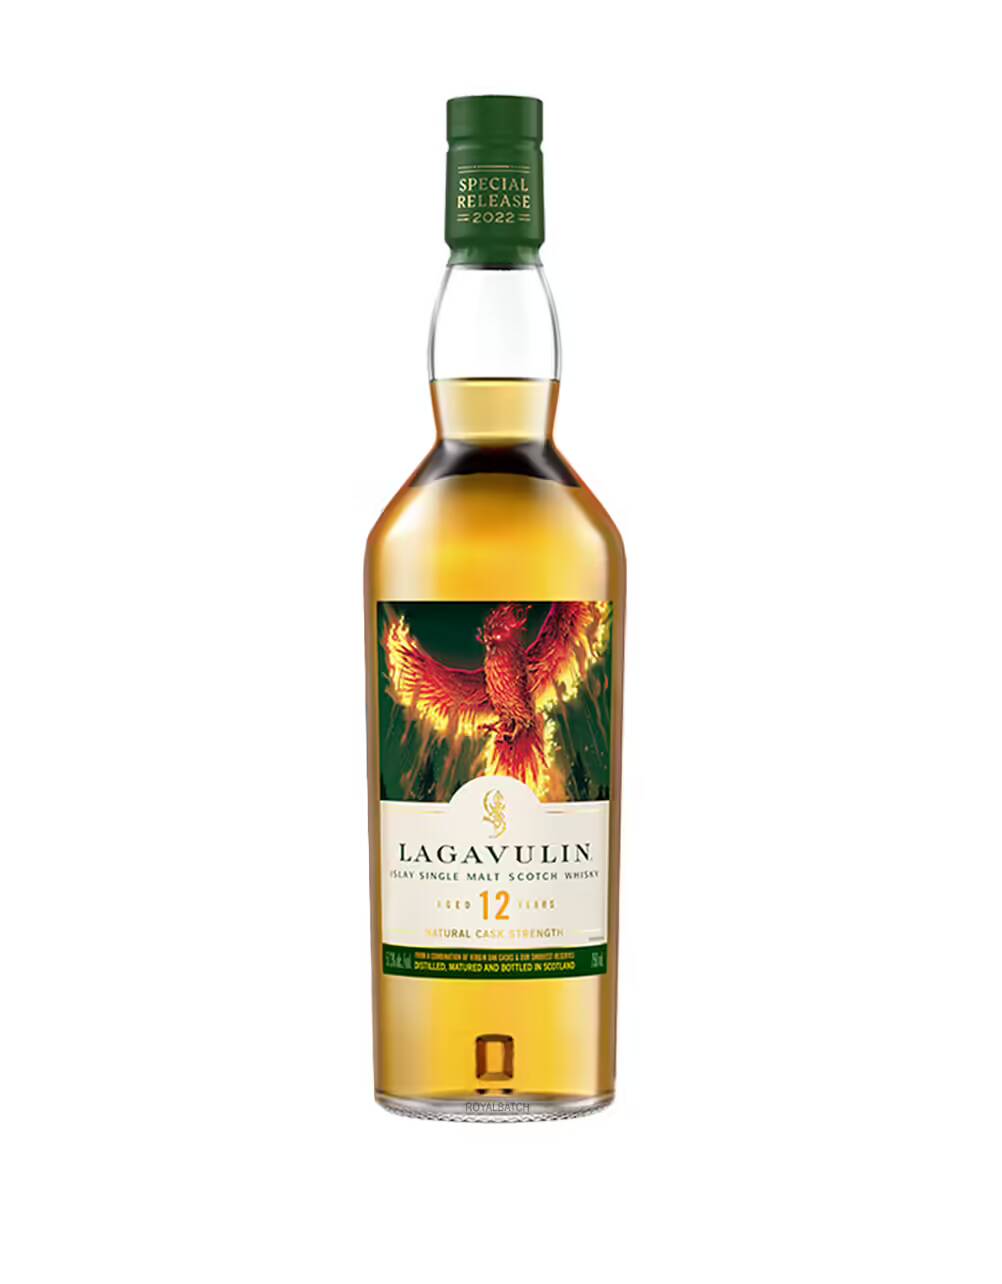 Lagavulin 12 Year Old Special Release Islay Single Malt Scotch Whisky